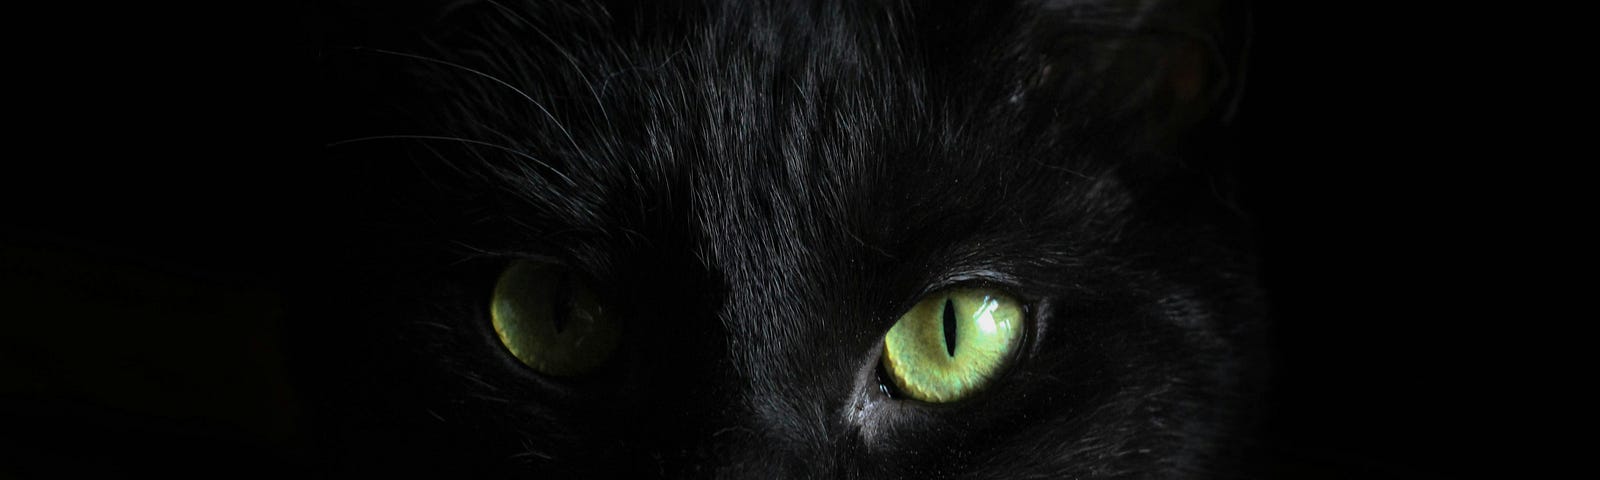 Black cat with green eyes looking intense